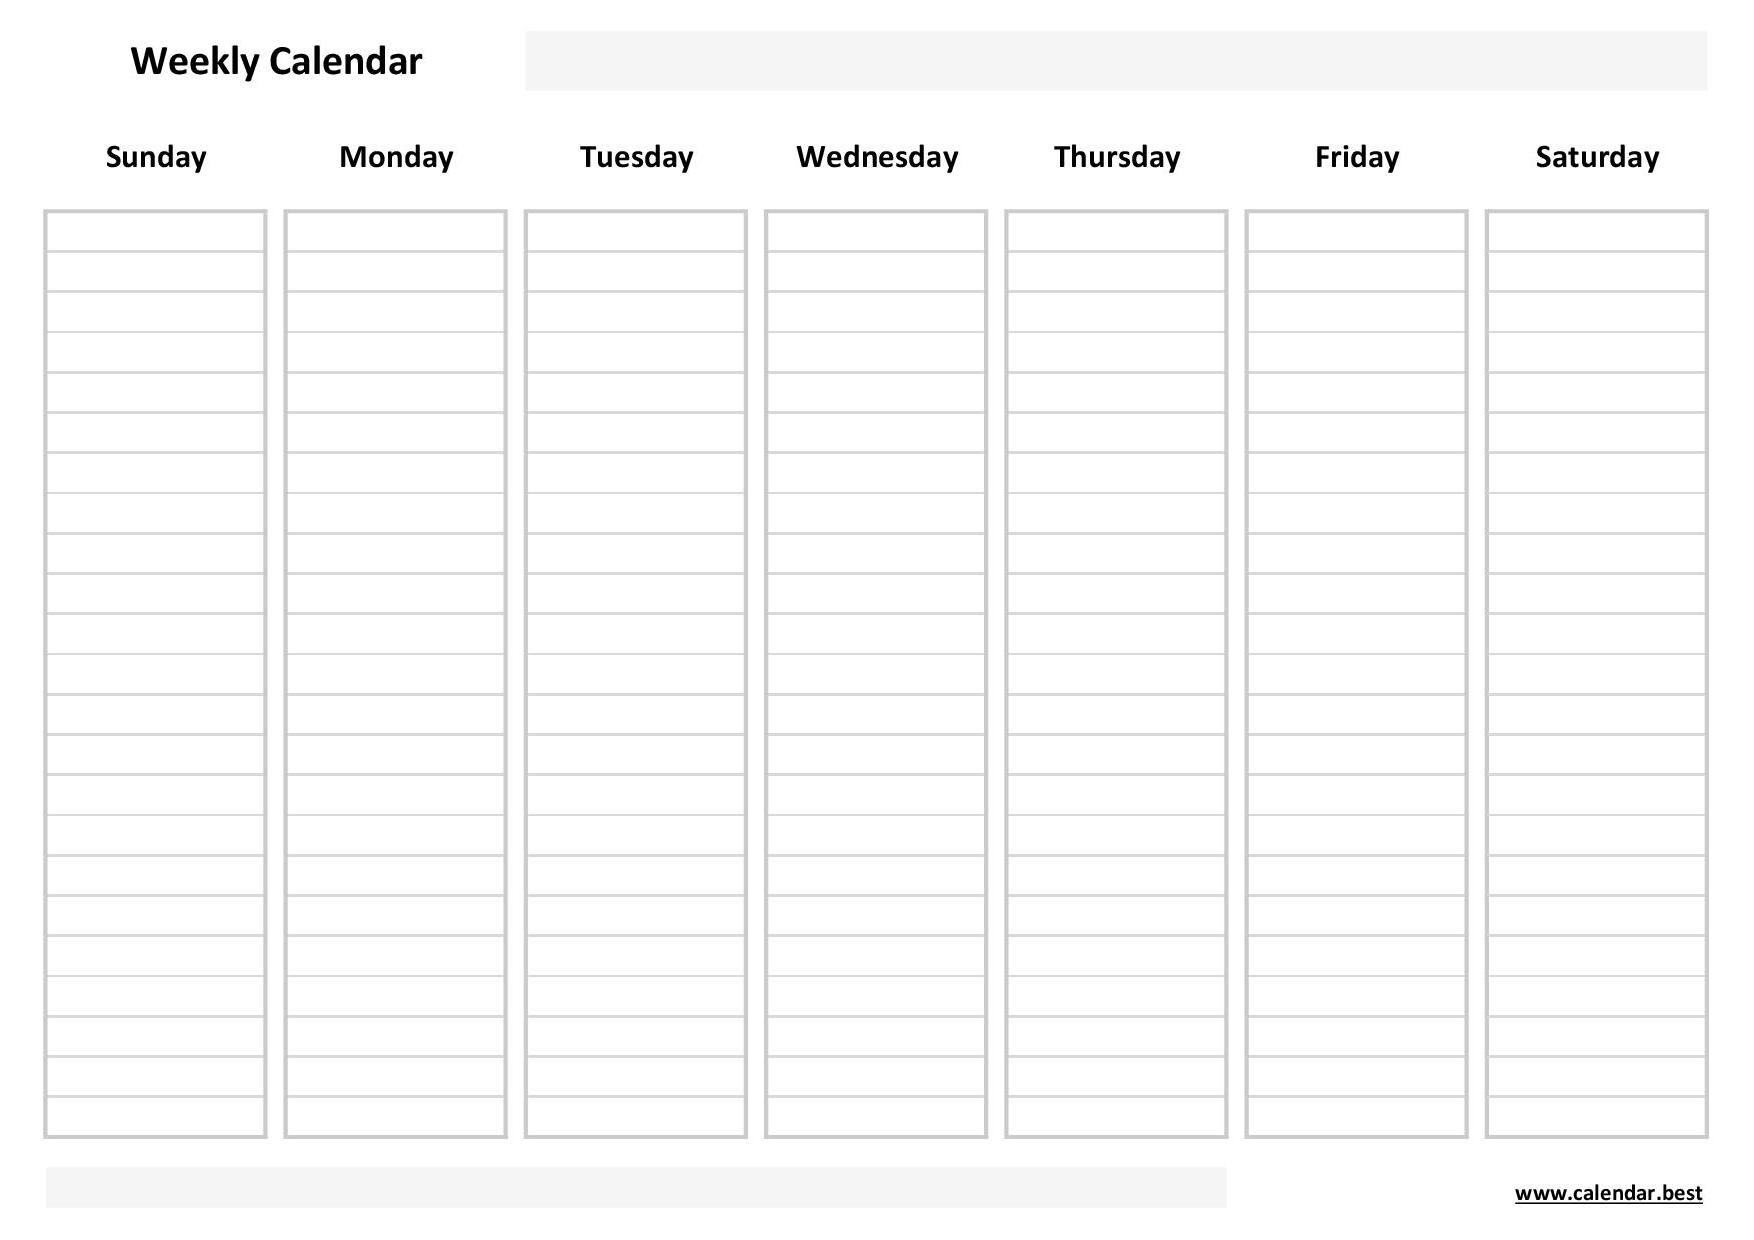 weekly calendar template with time slots google search weekly